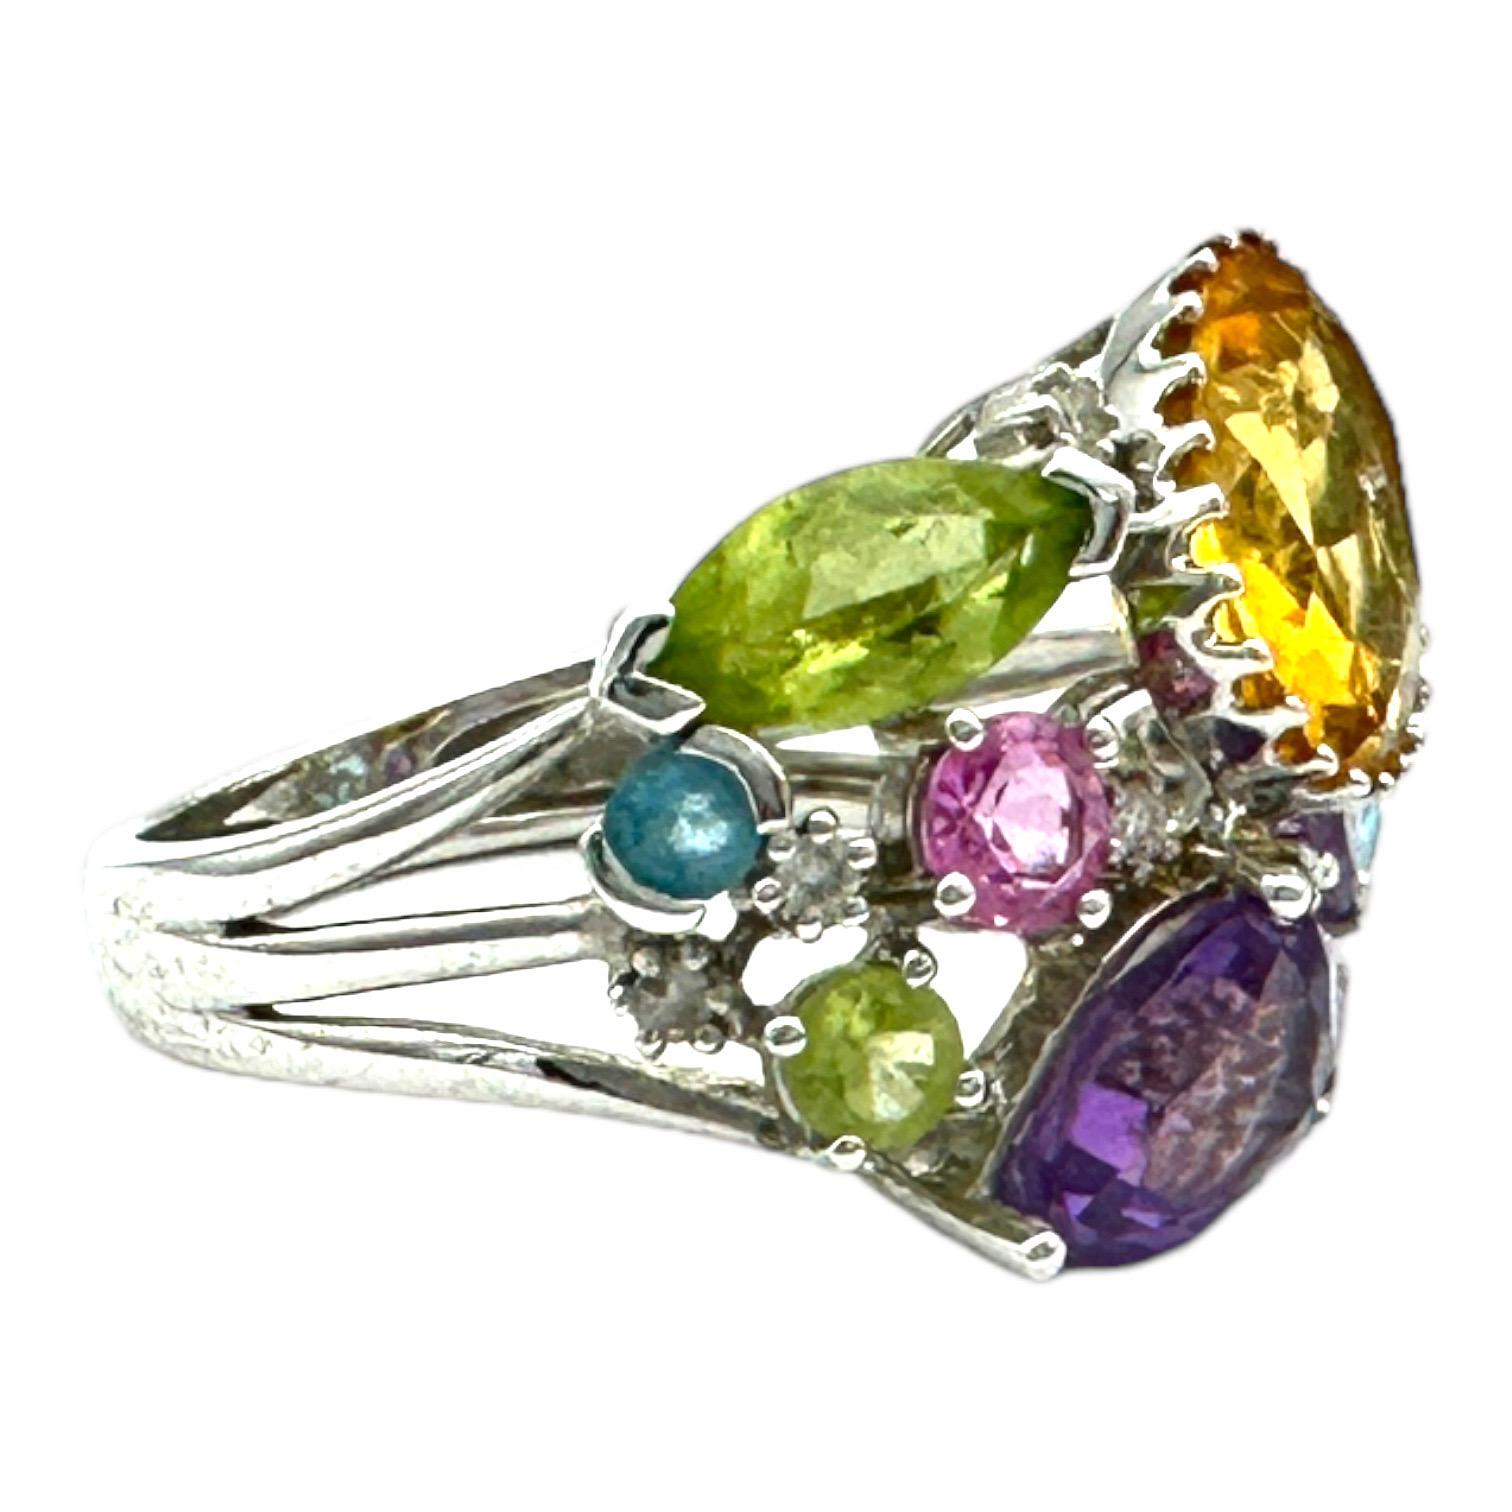 The 4.50 CTW Colored Gemstone Confetti Ring is the perfect accessory to add color to any look. This stunning ring is crafted with 14-karat white gold for maximum shine and durability and features a 15 mm wide band for a dazzling effect. With a